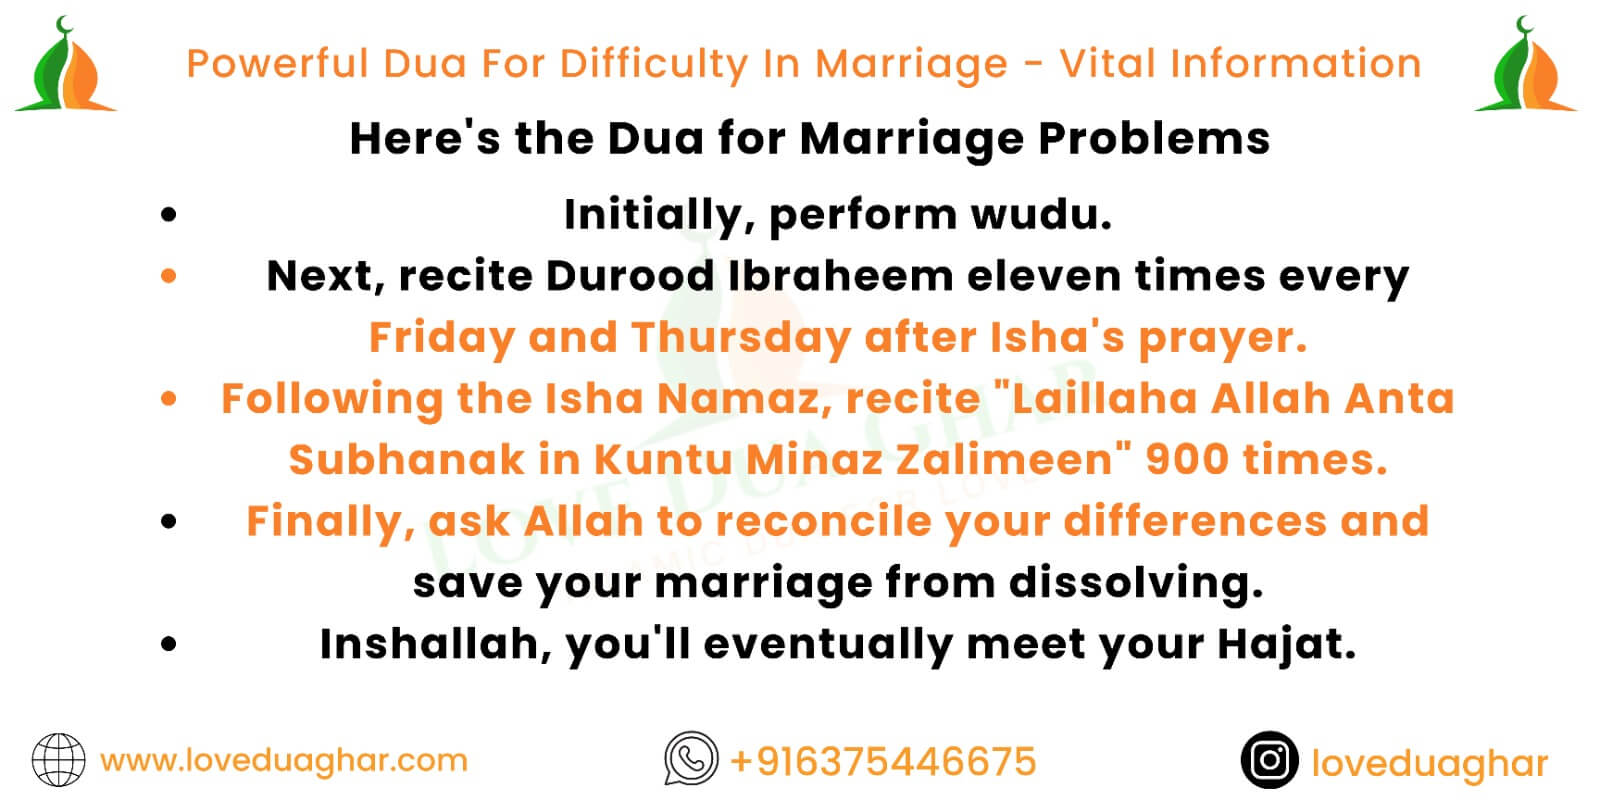 Dua For Difficulty In Marriage